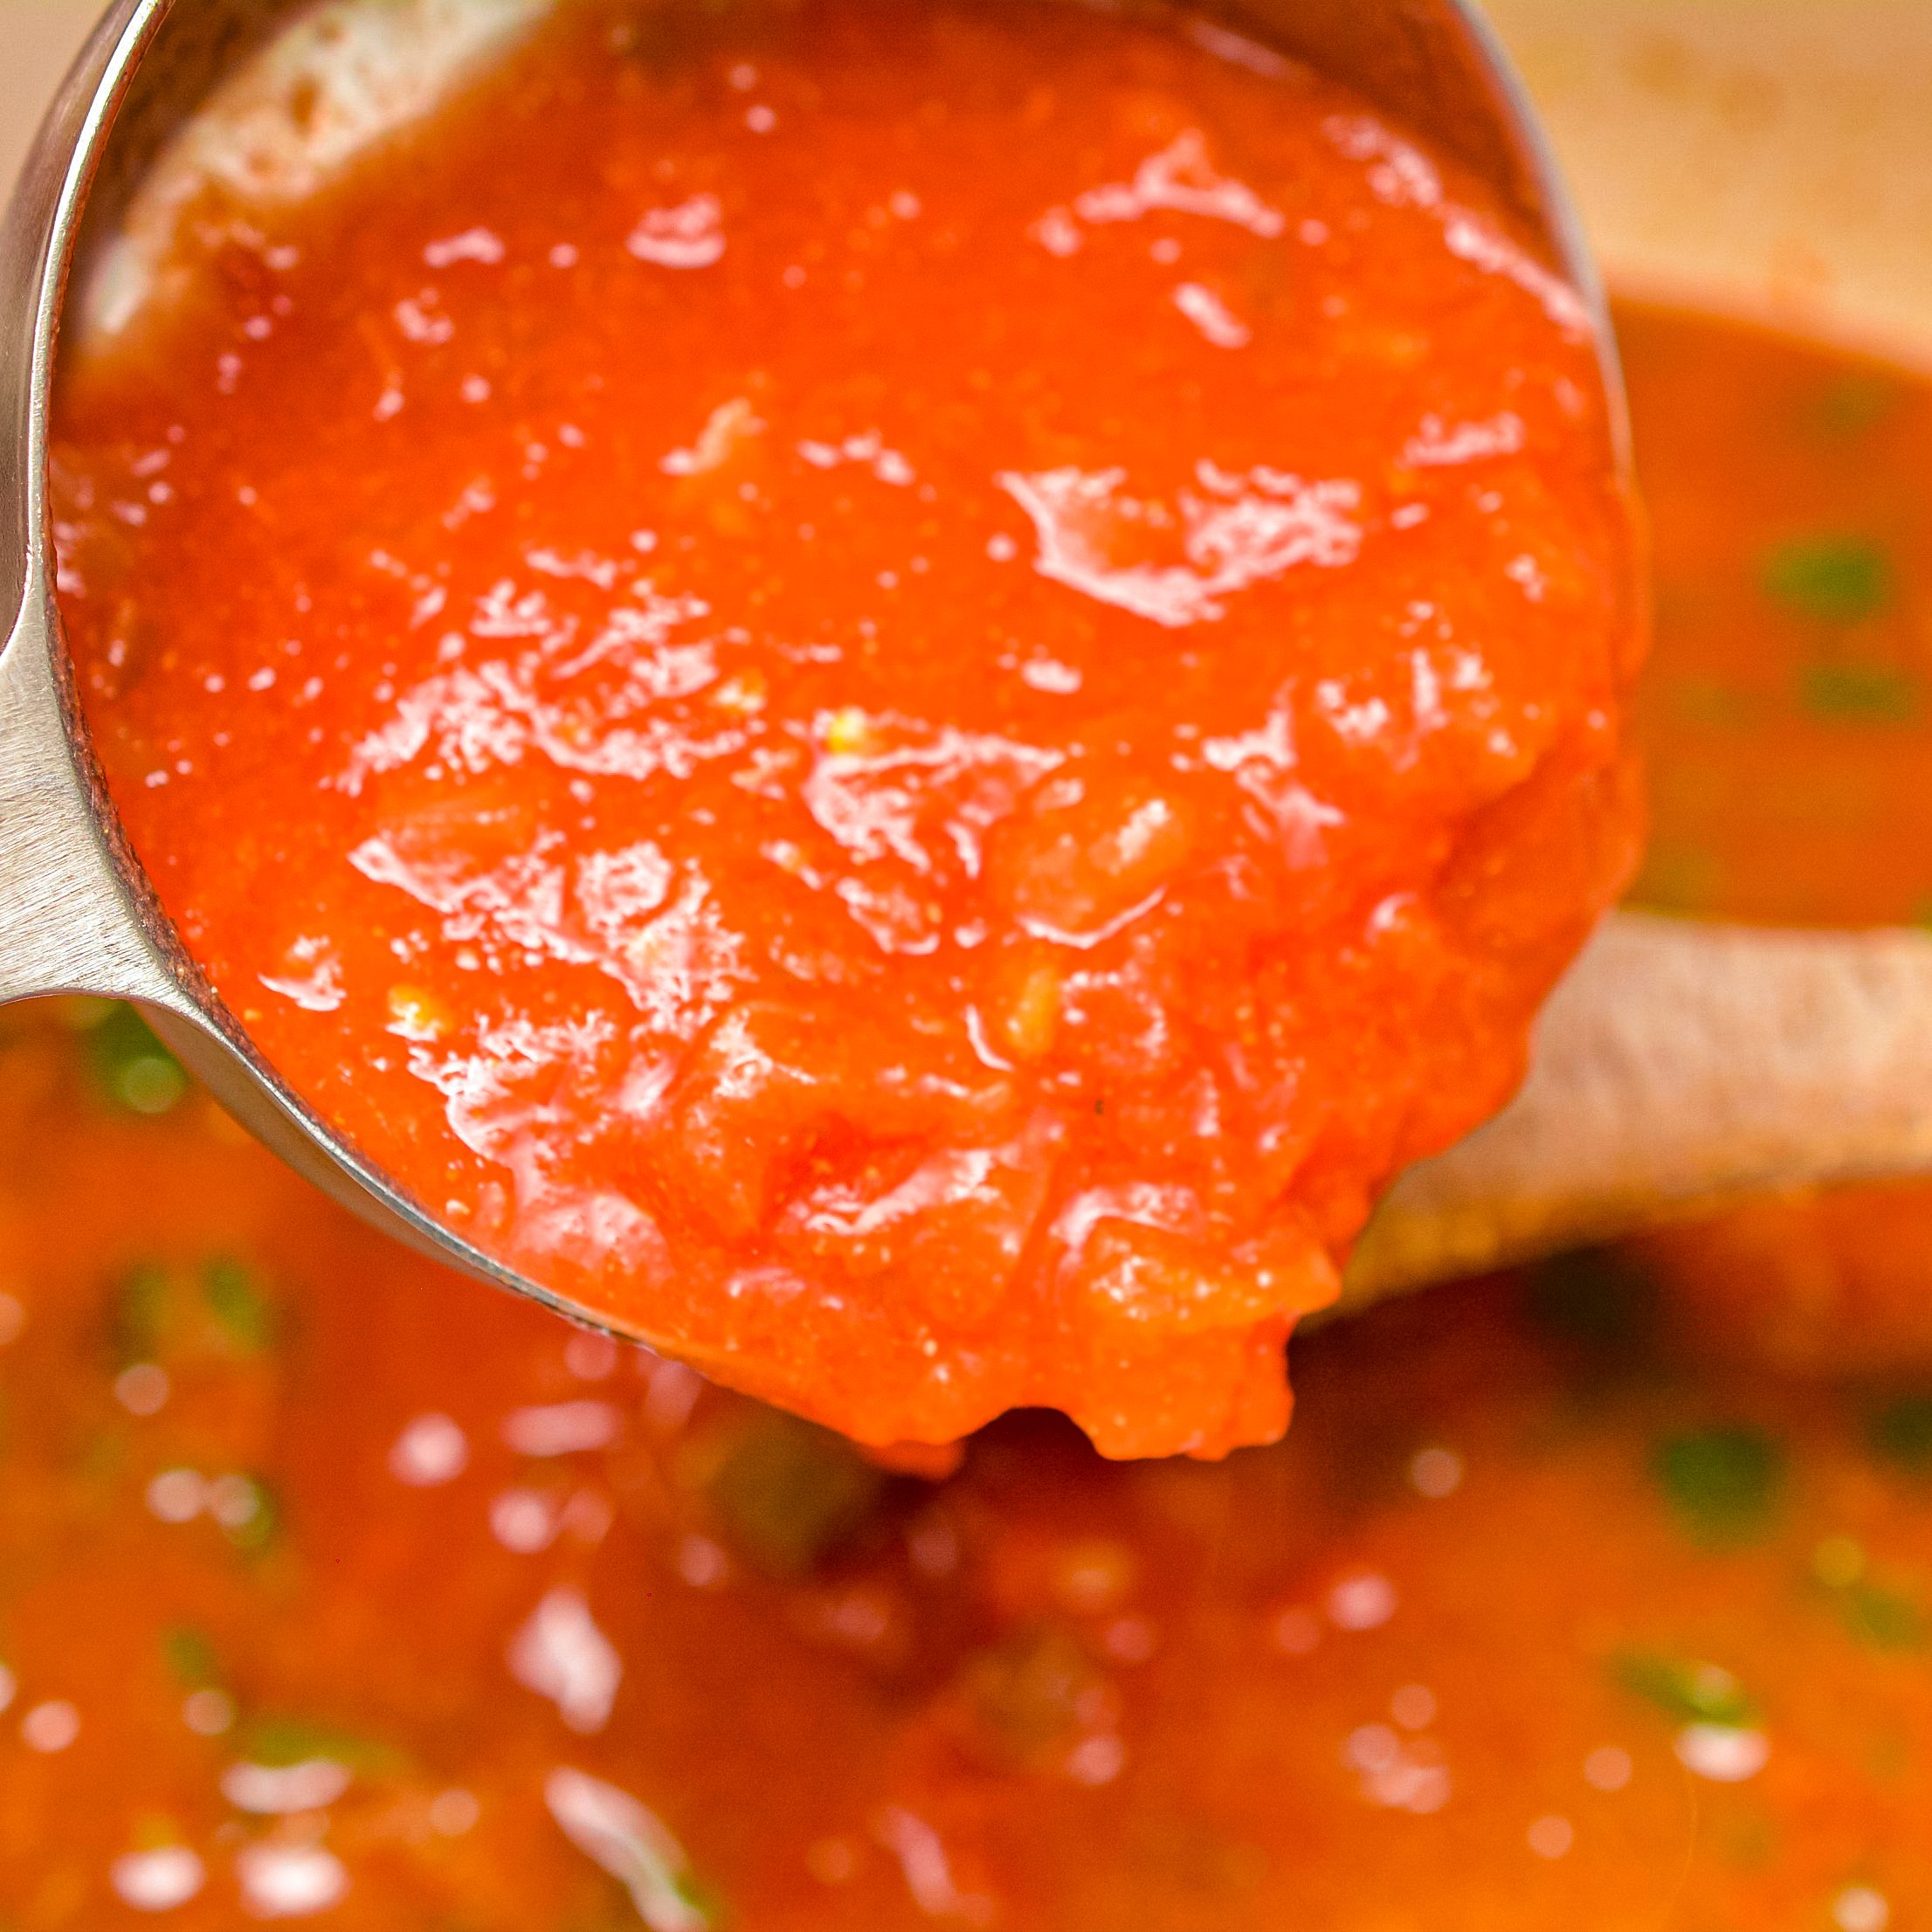 Reduce the heat to medium, and add 1 cup of low-carb salsa.